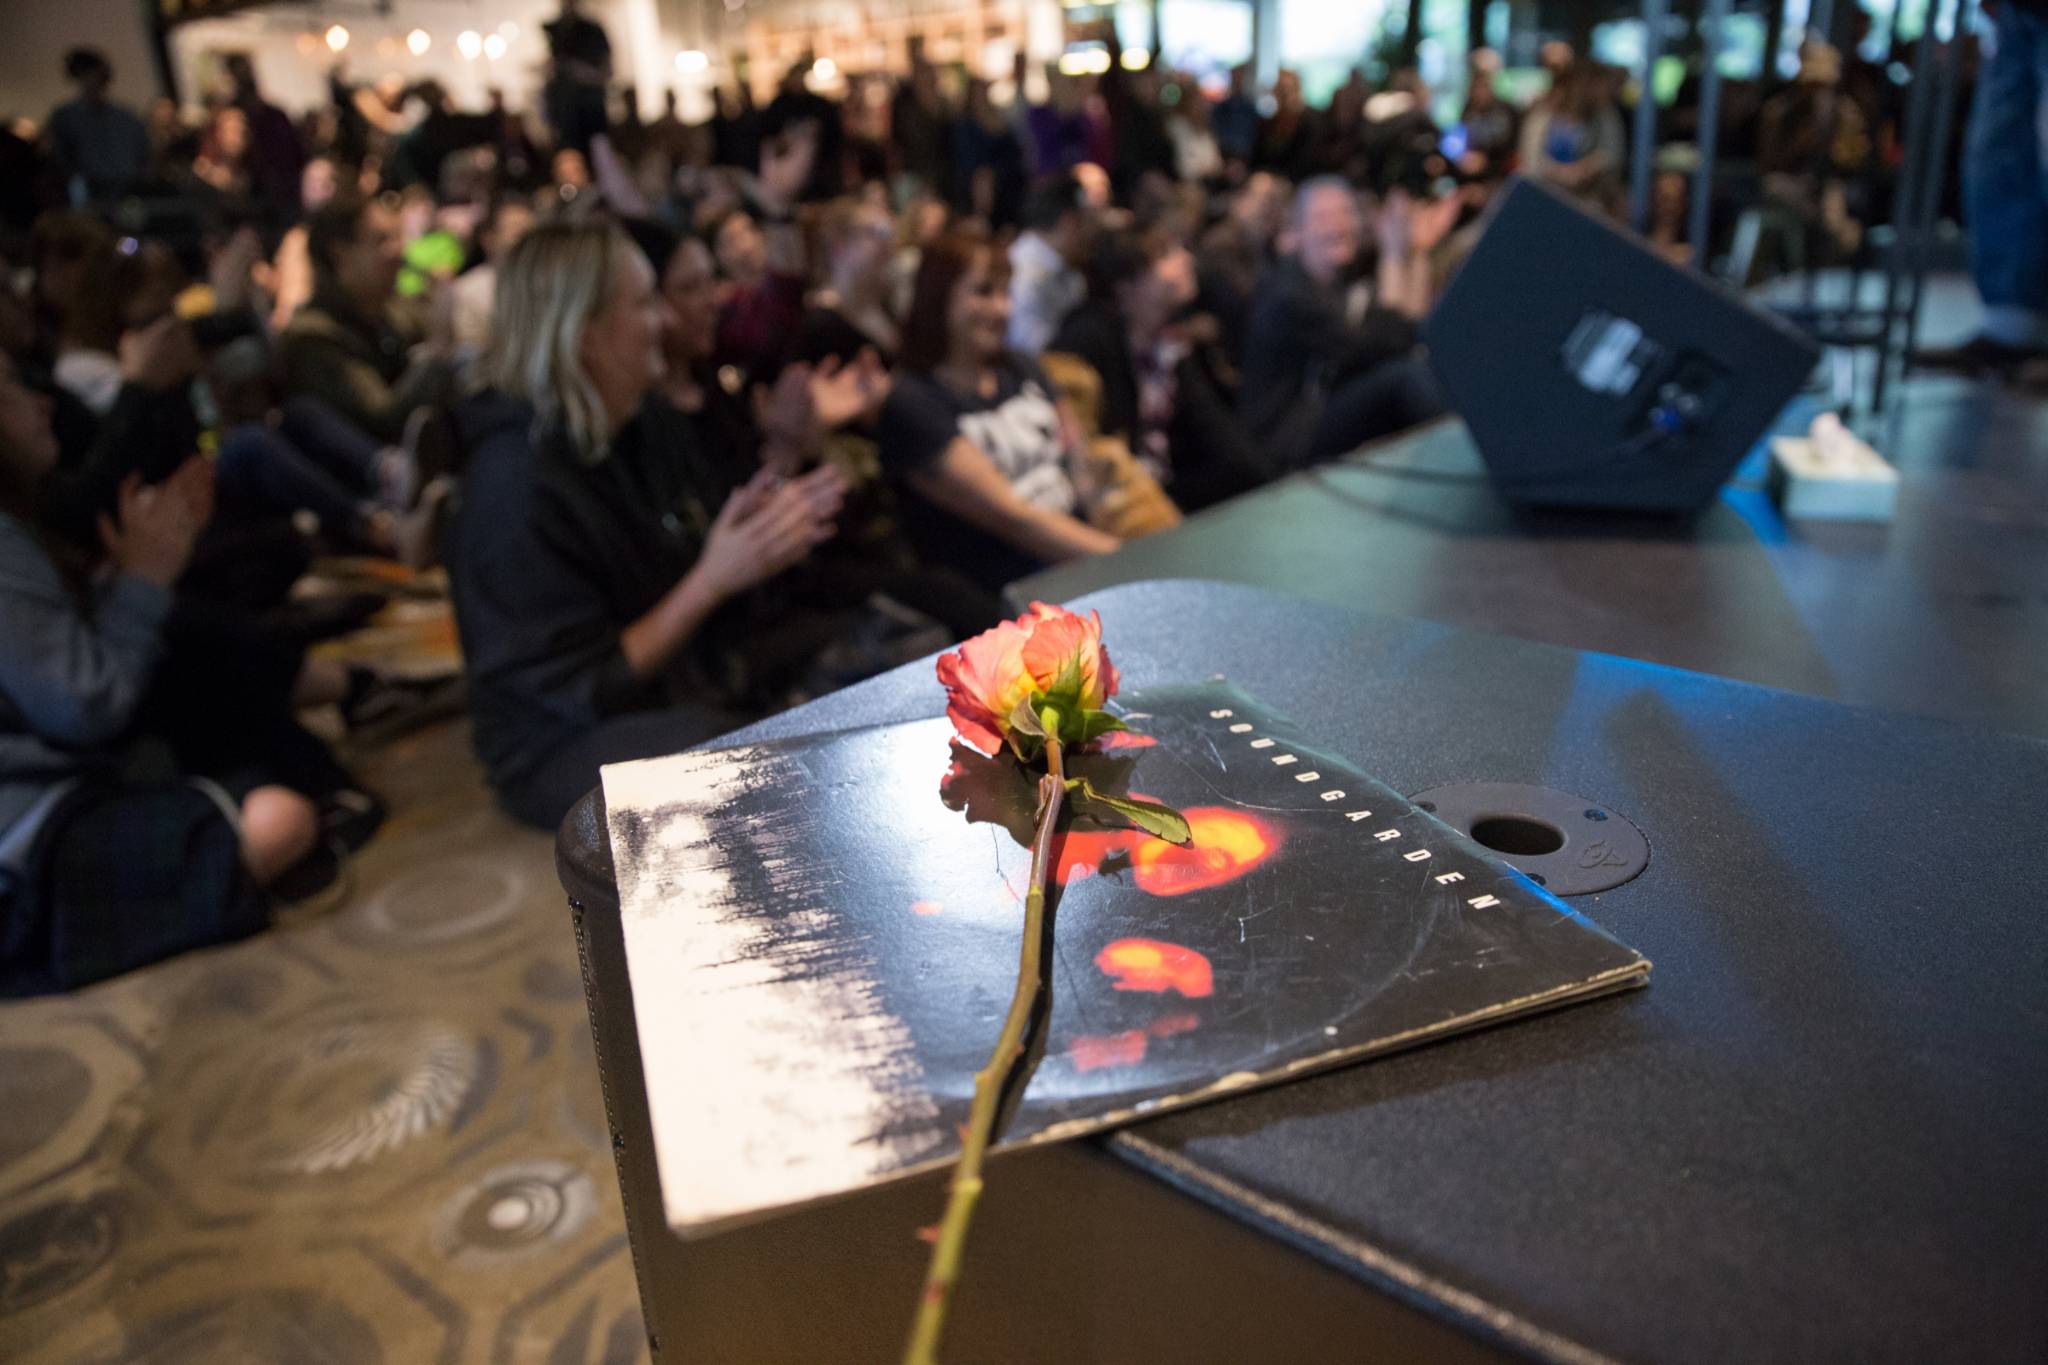 Soundgarden’s ‘Superunknown’ album sits beneath a rose on top of a speaker at the KEXP memorial for Chris Cornell. Photography by Alex Garland